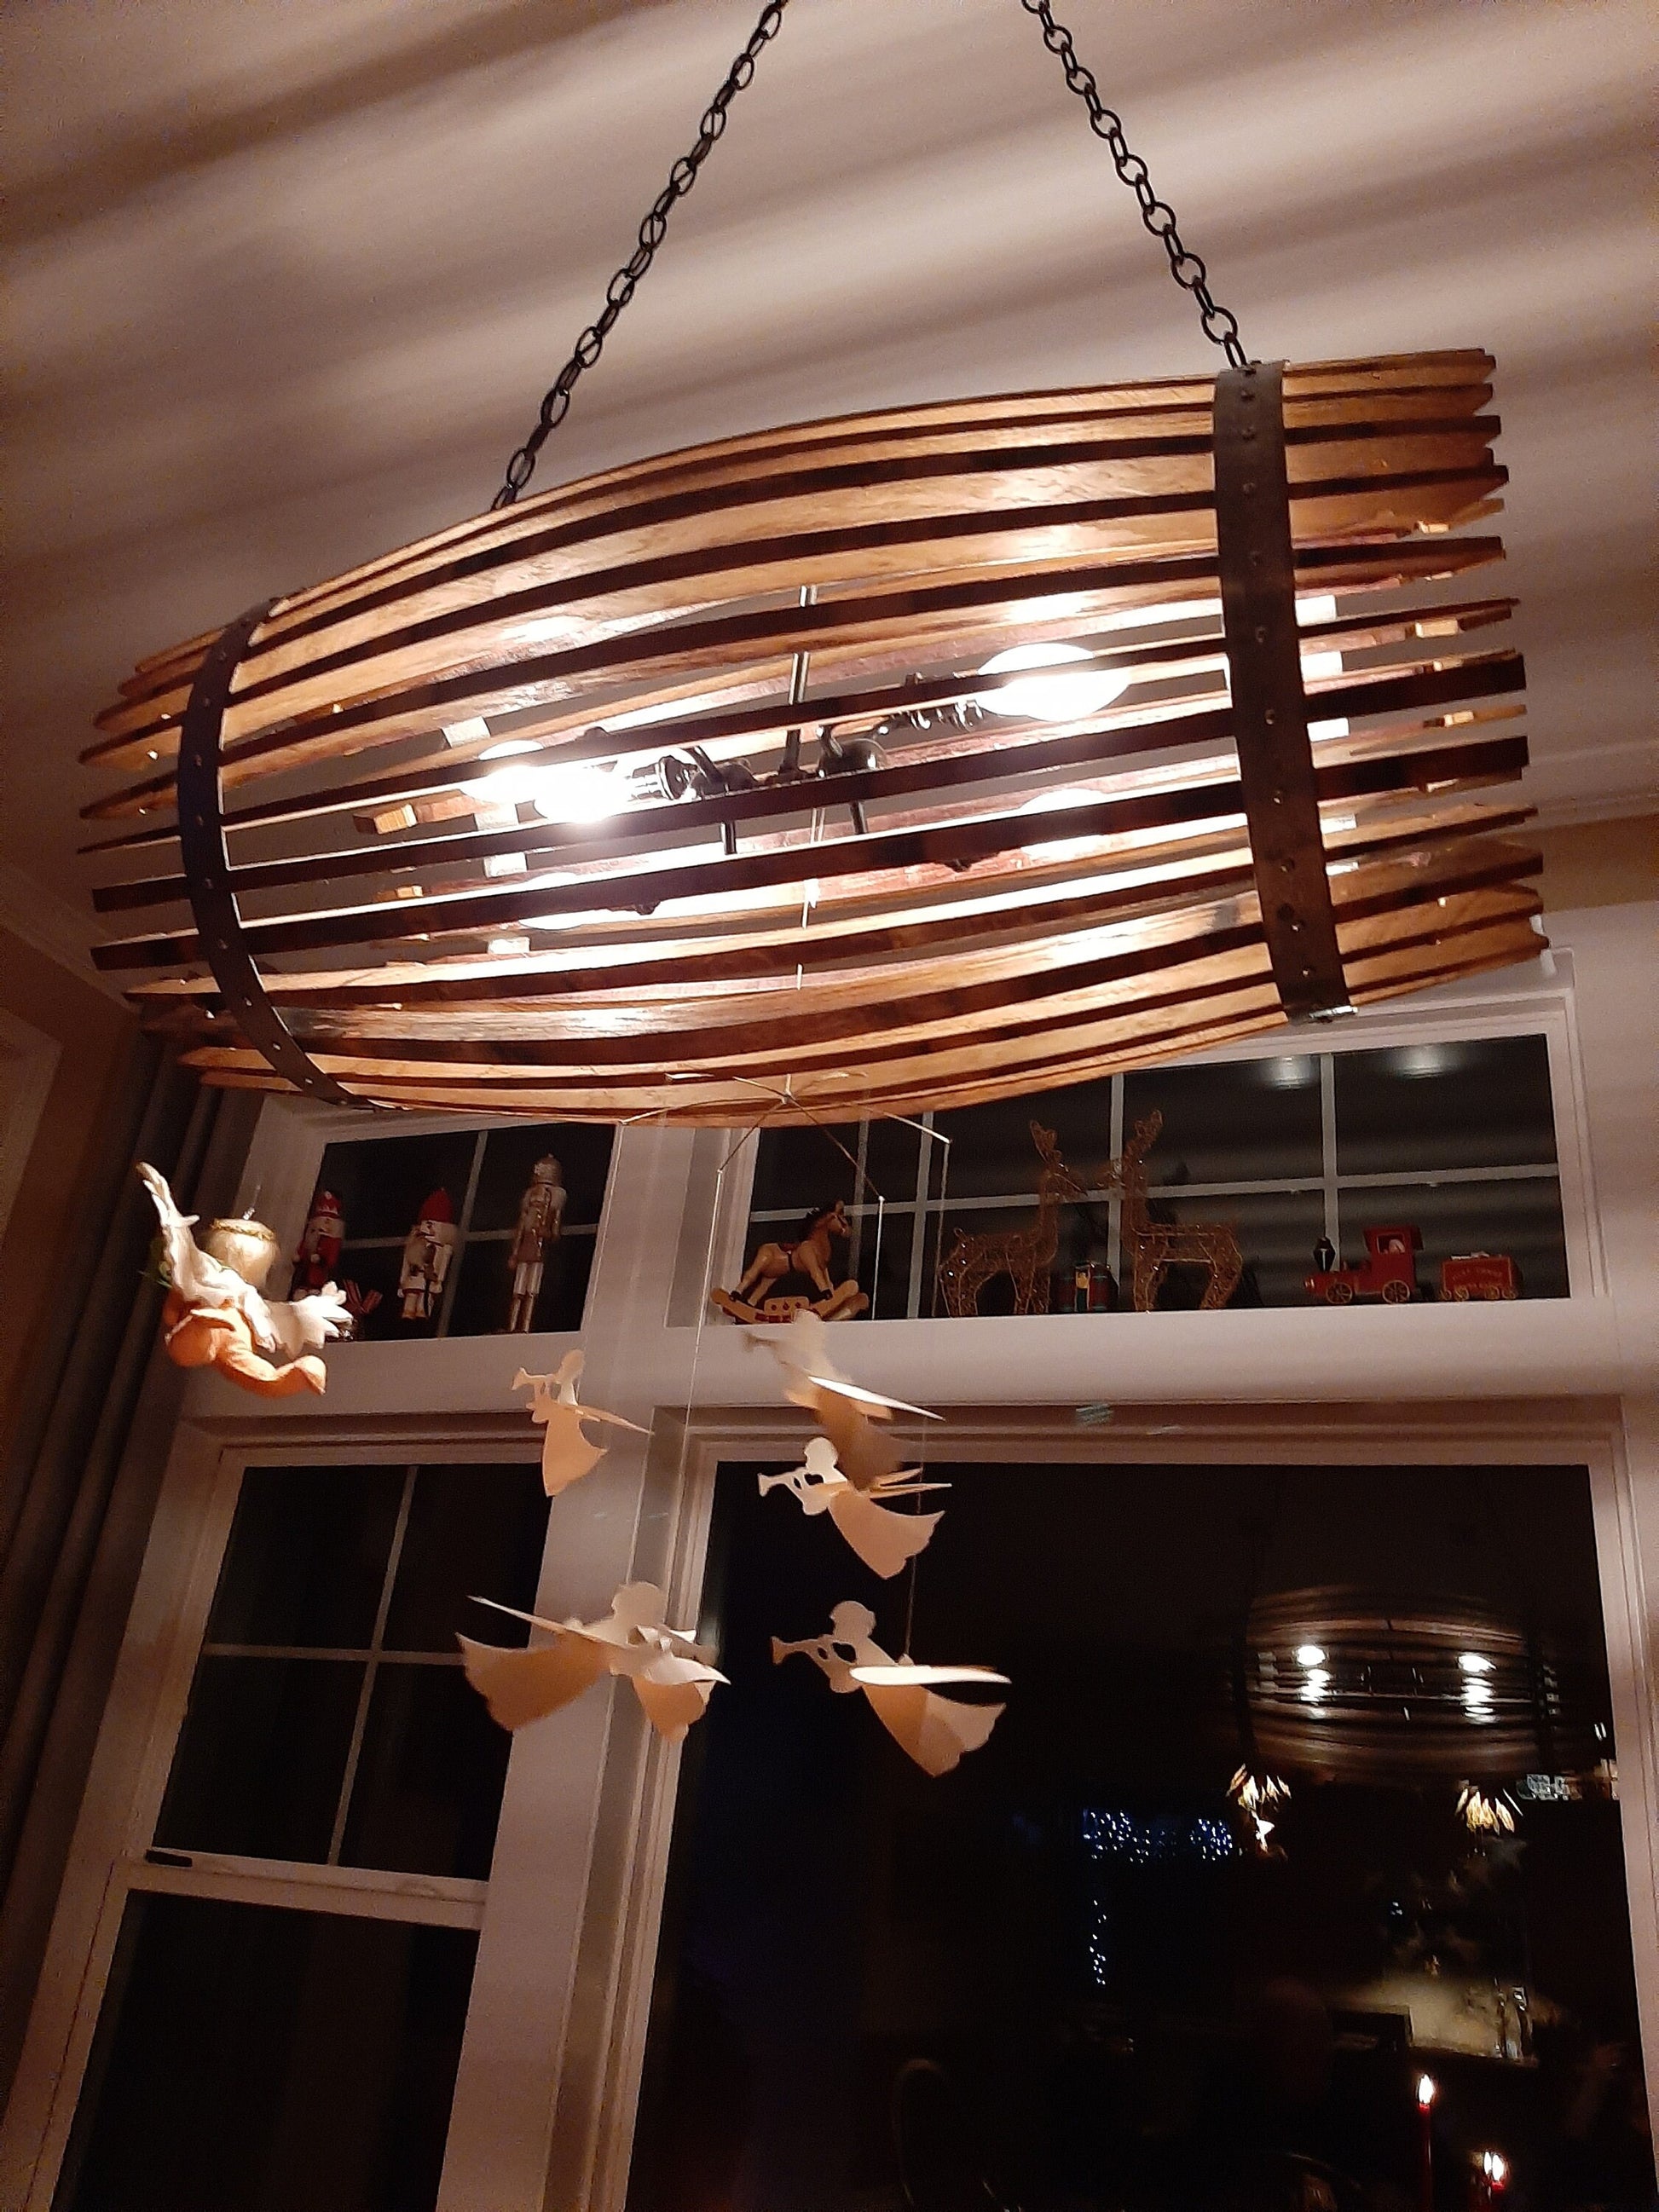 Wine Barrel Chandelier - Catch - Made from retired California wine barrels. 100% Recycled!